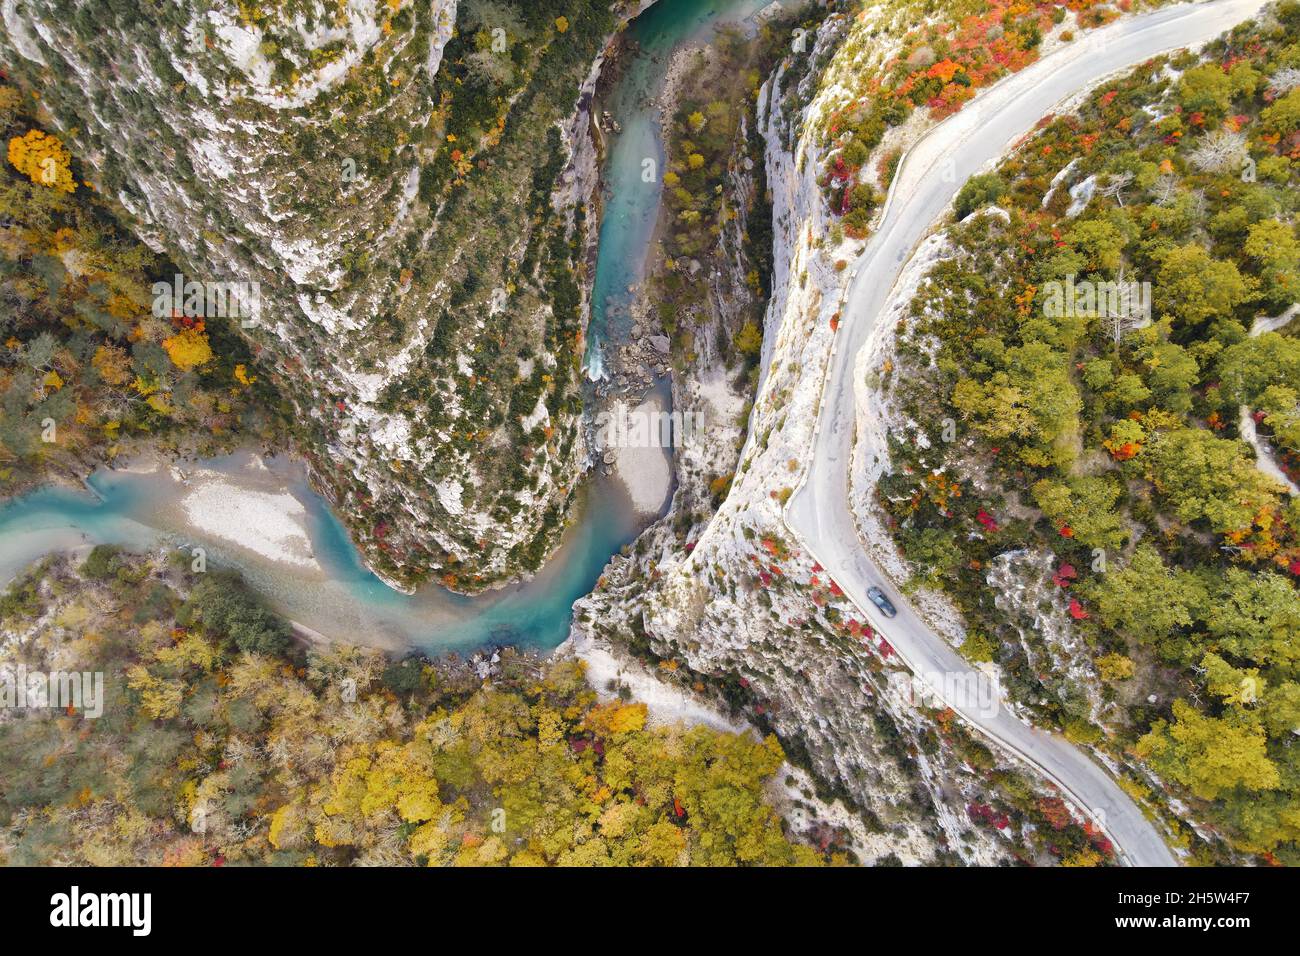 The Verdon Gorge (French: Gorges du Verdon) is a famous river canyon located in the Provence-Alpes-Côte d'Azur region of Southeastern France.Drone vie Stock Photo